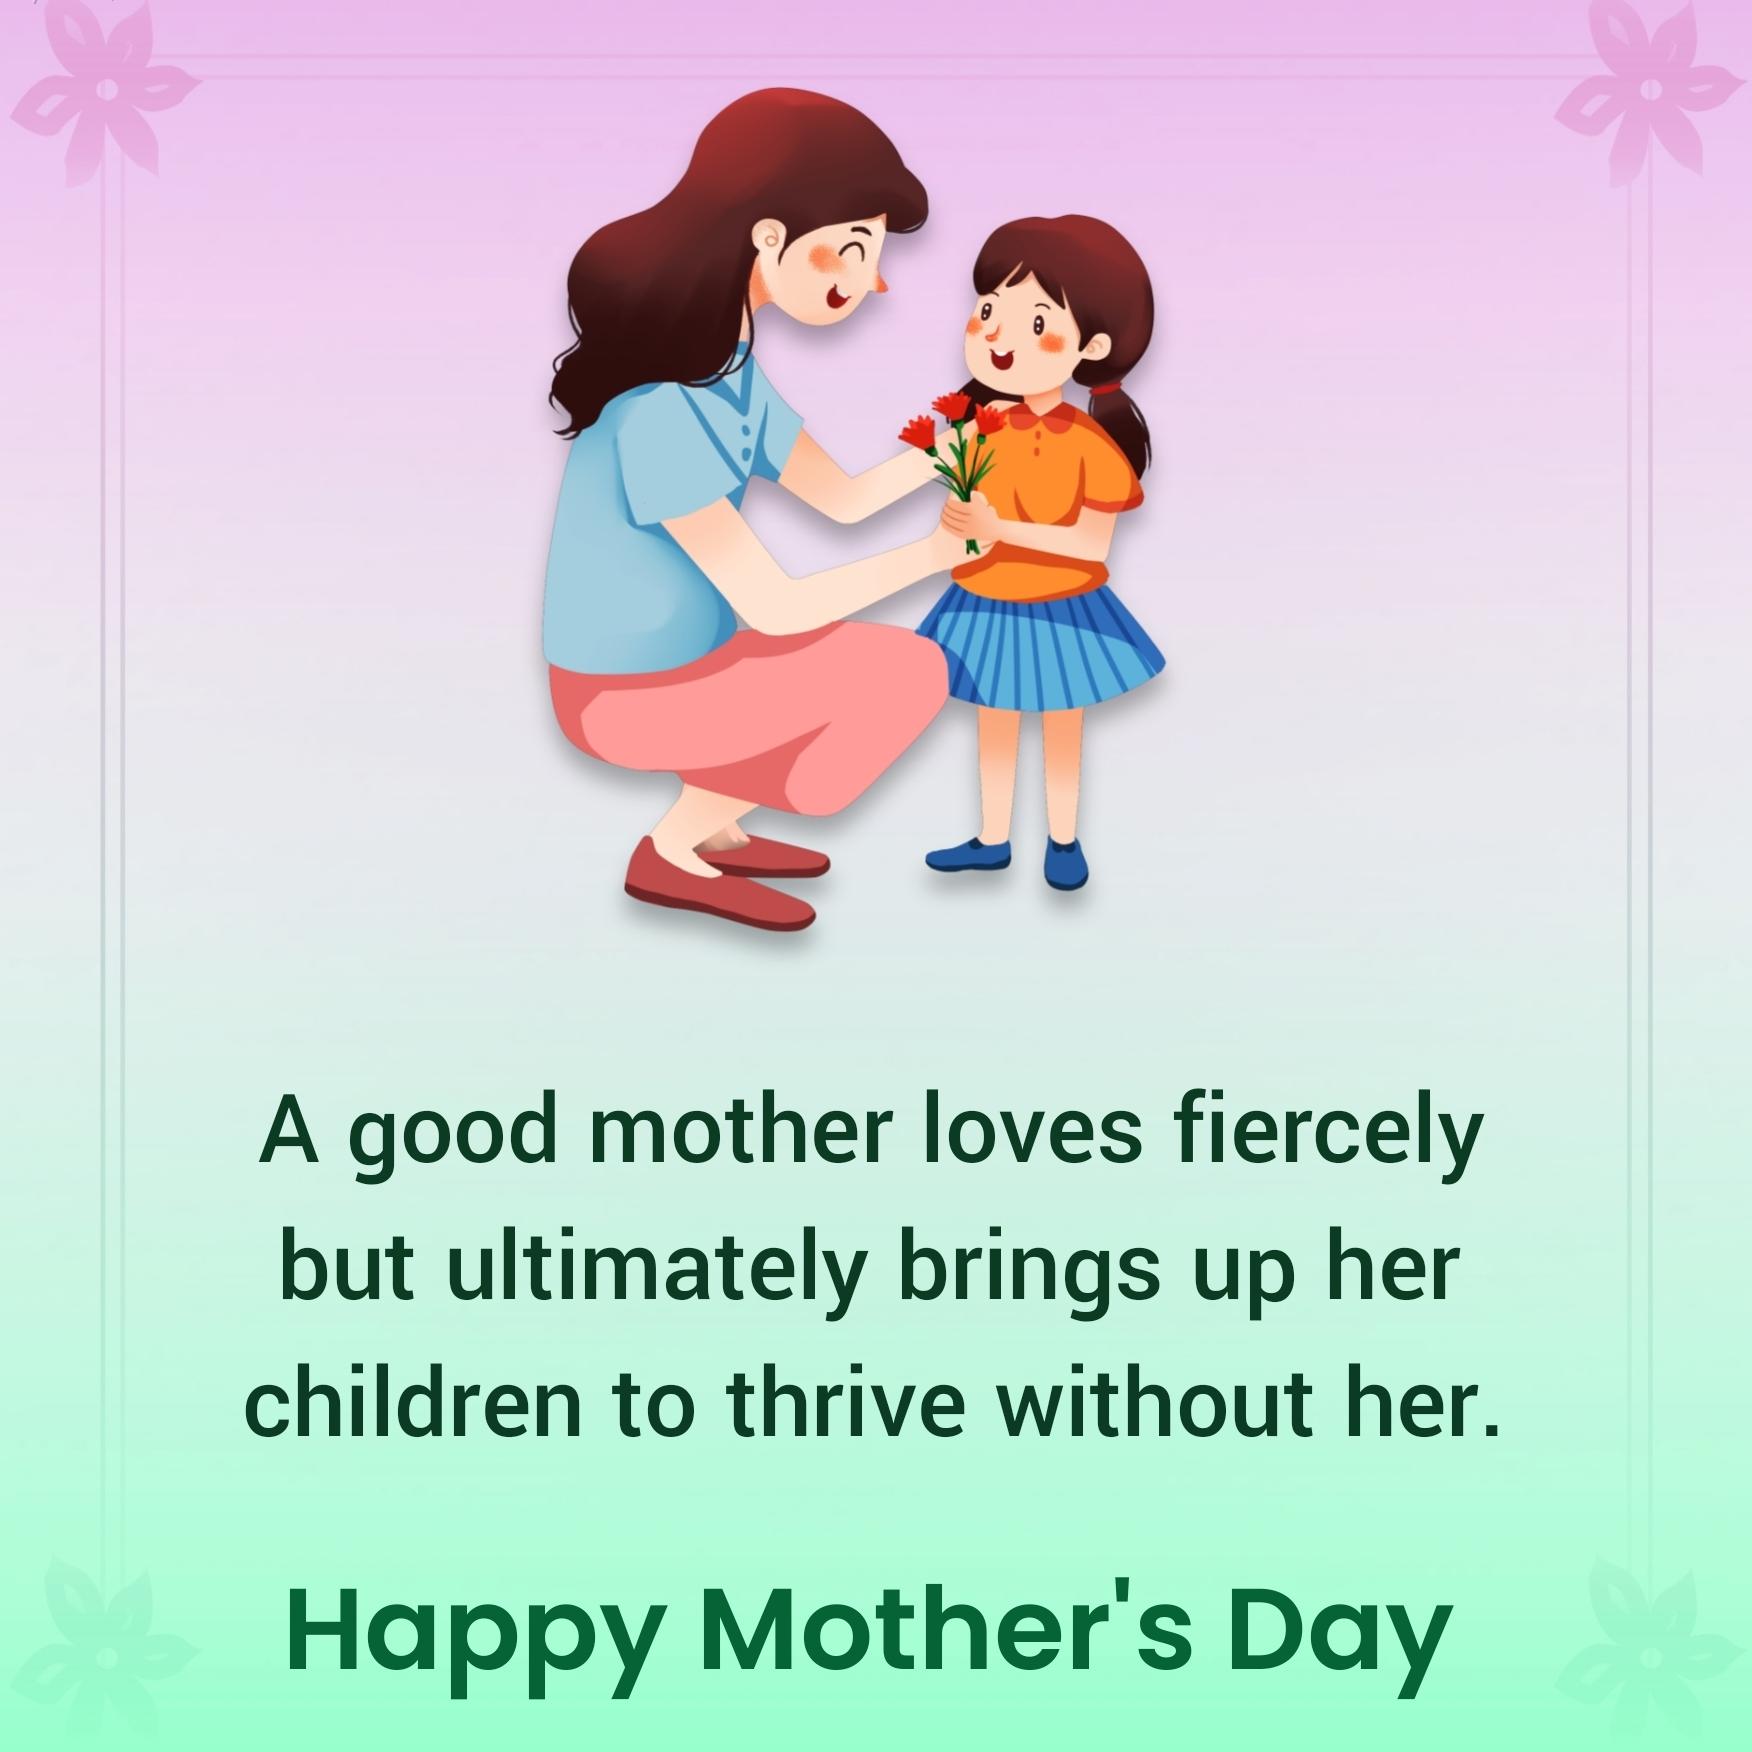 A good mother loves fiercely but ultimately brings up her children